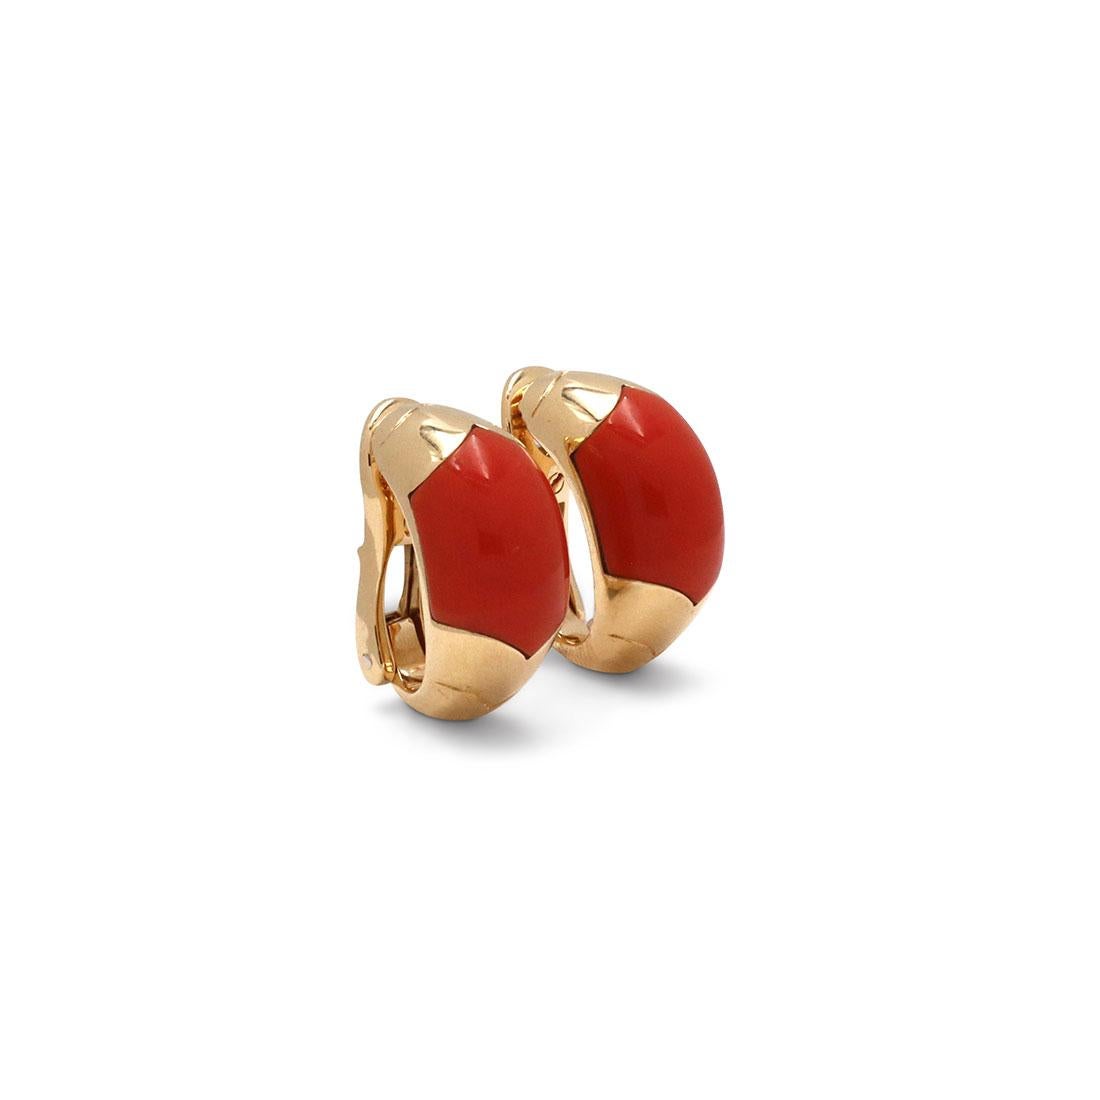 Round Cut Vintage Bvlgari Tronchetto Yellow Gold Coral Earrings